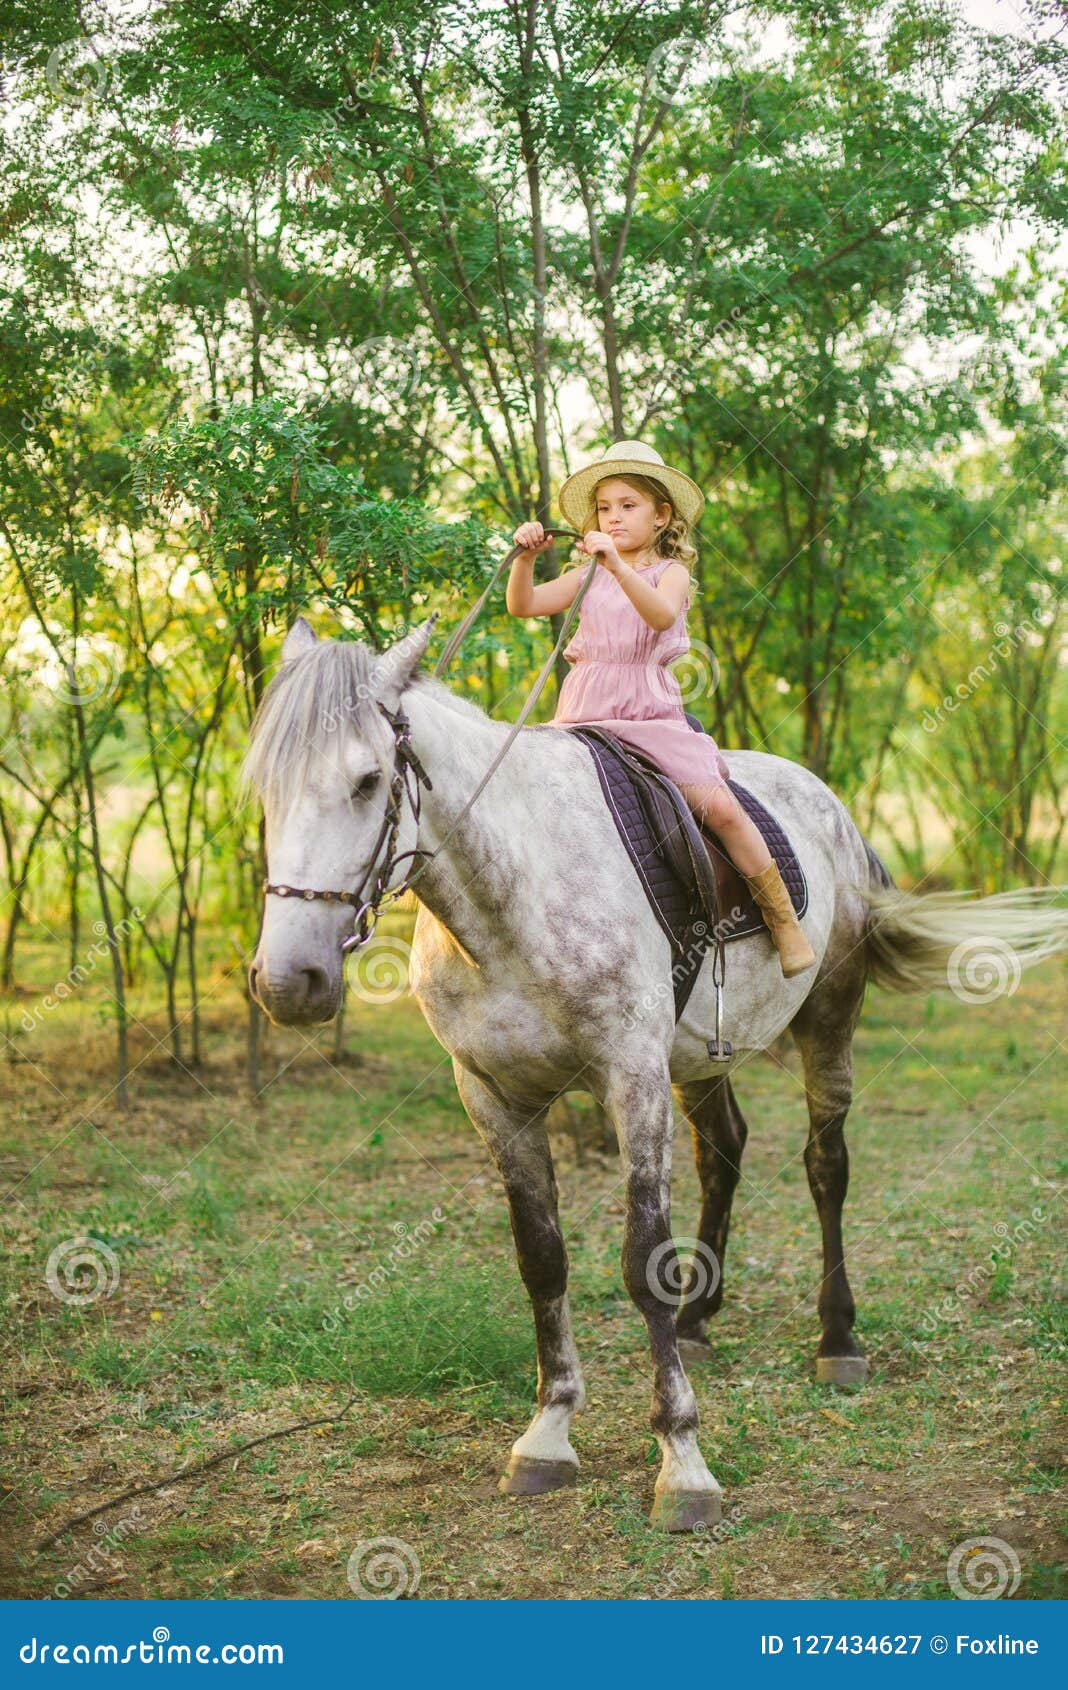 Little Cute Girl with Light Curly Hair in a Straw Hat Riding a Horse at ...